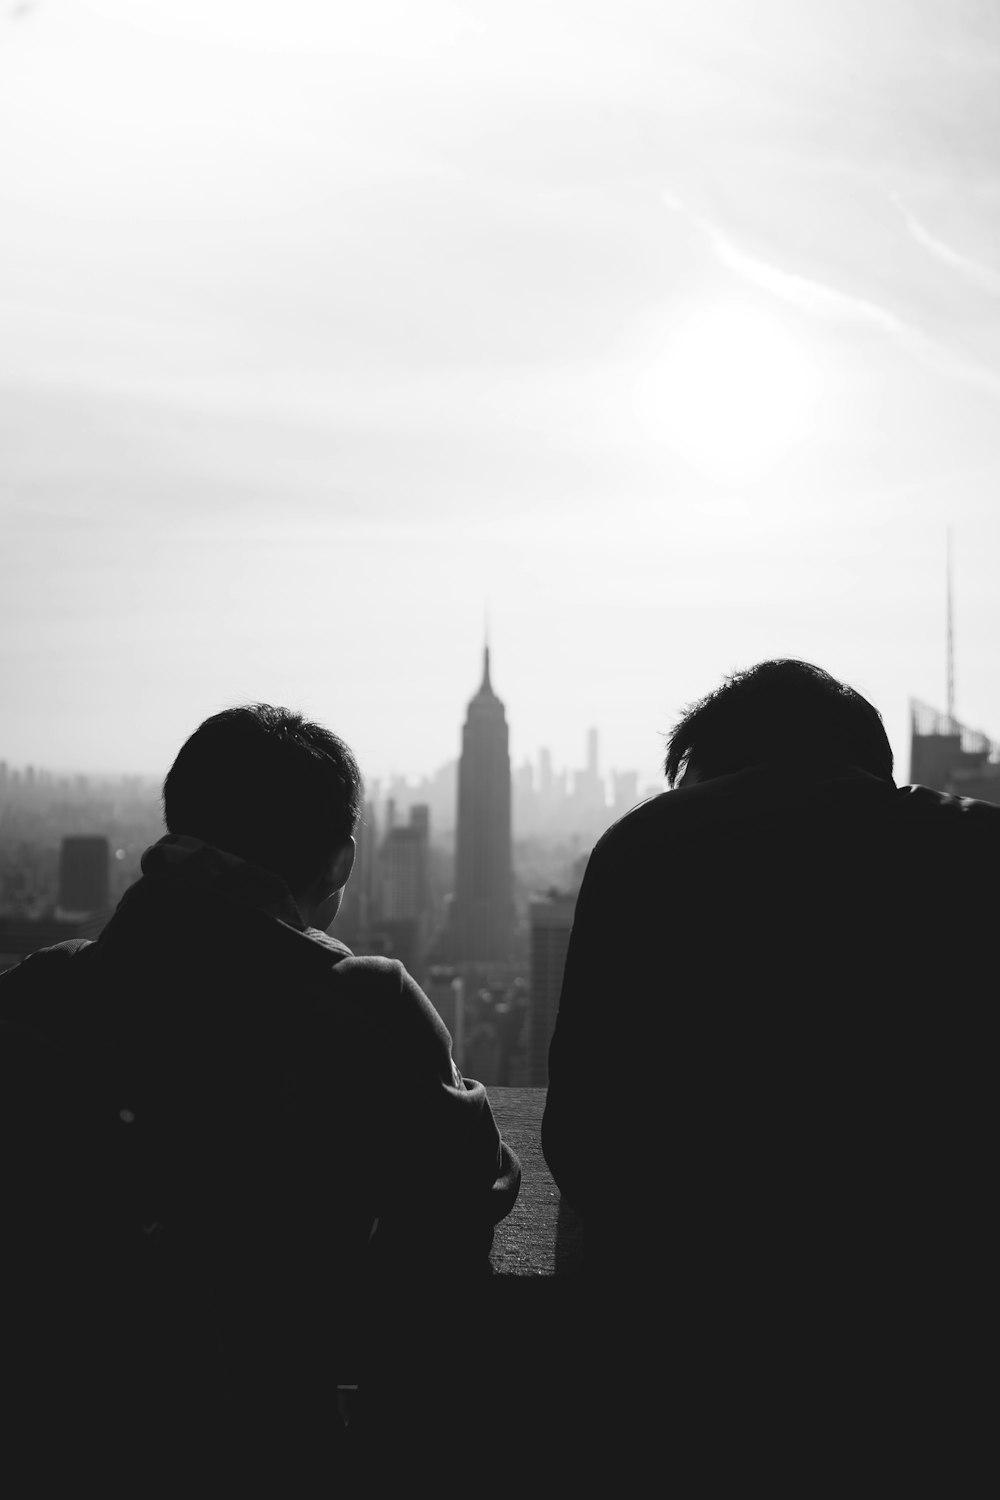 silhouette of 2 person standing near high rise building during daytime